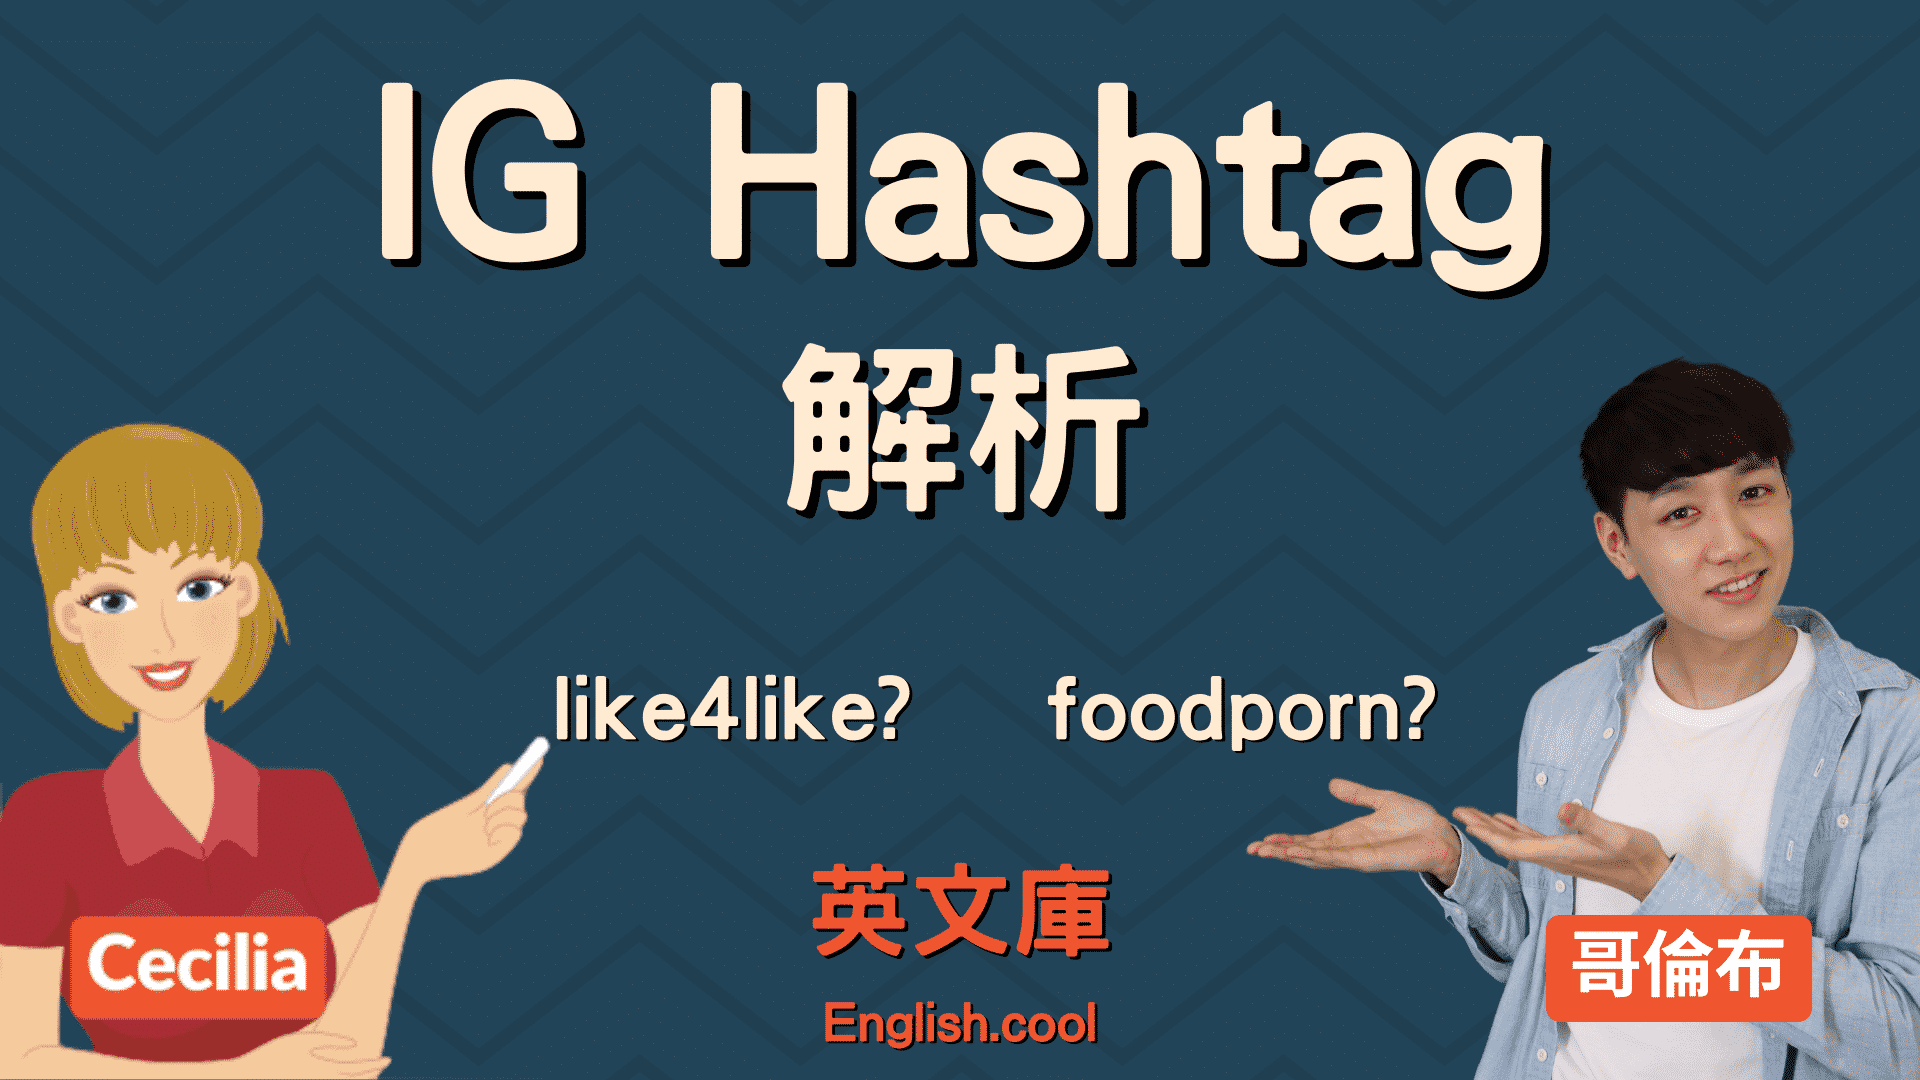 You are currently viewing IG Hashtag 解析！#like4like #foodporn 等火紅標籤是什麼意思？